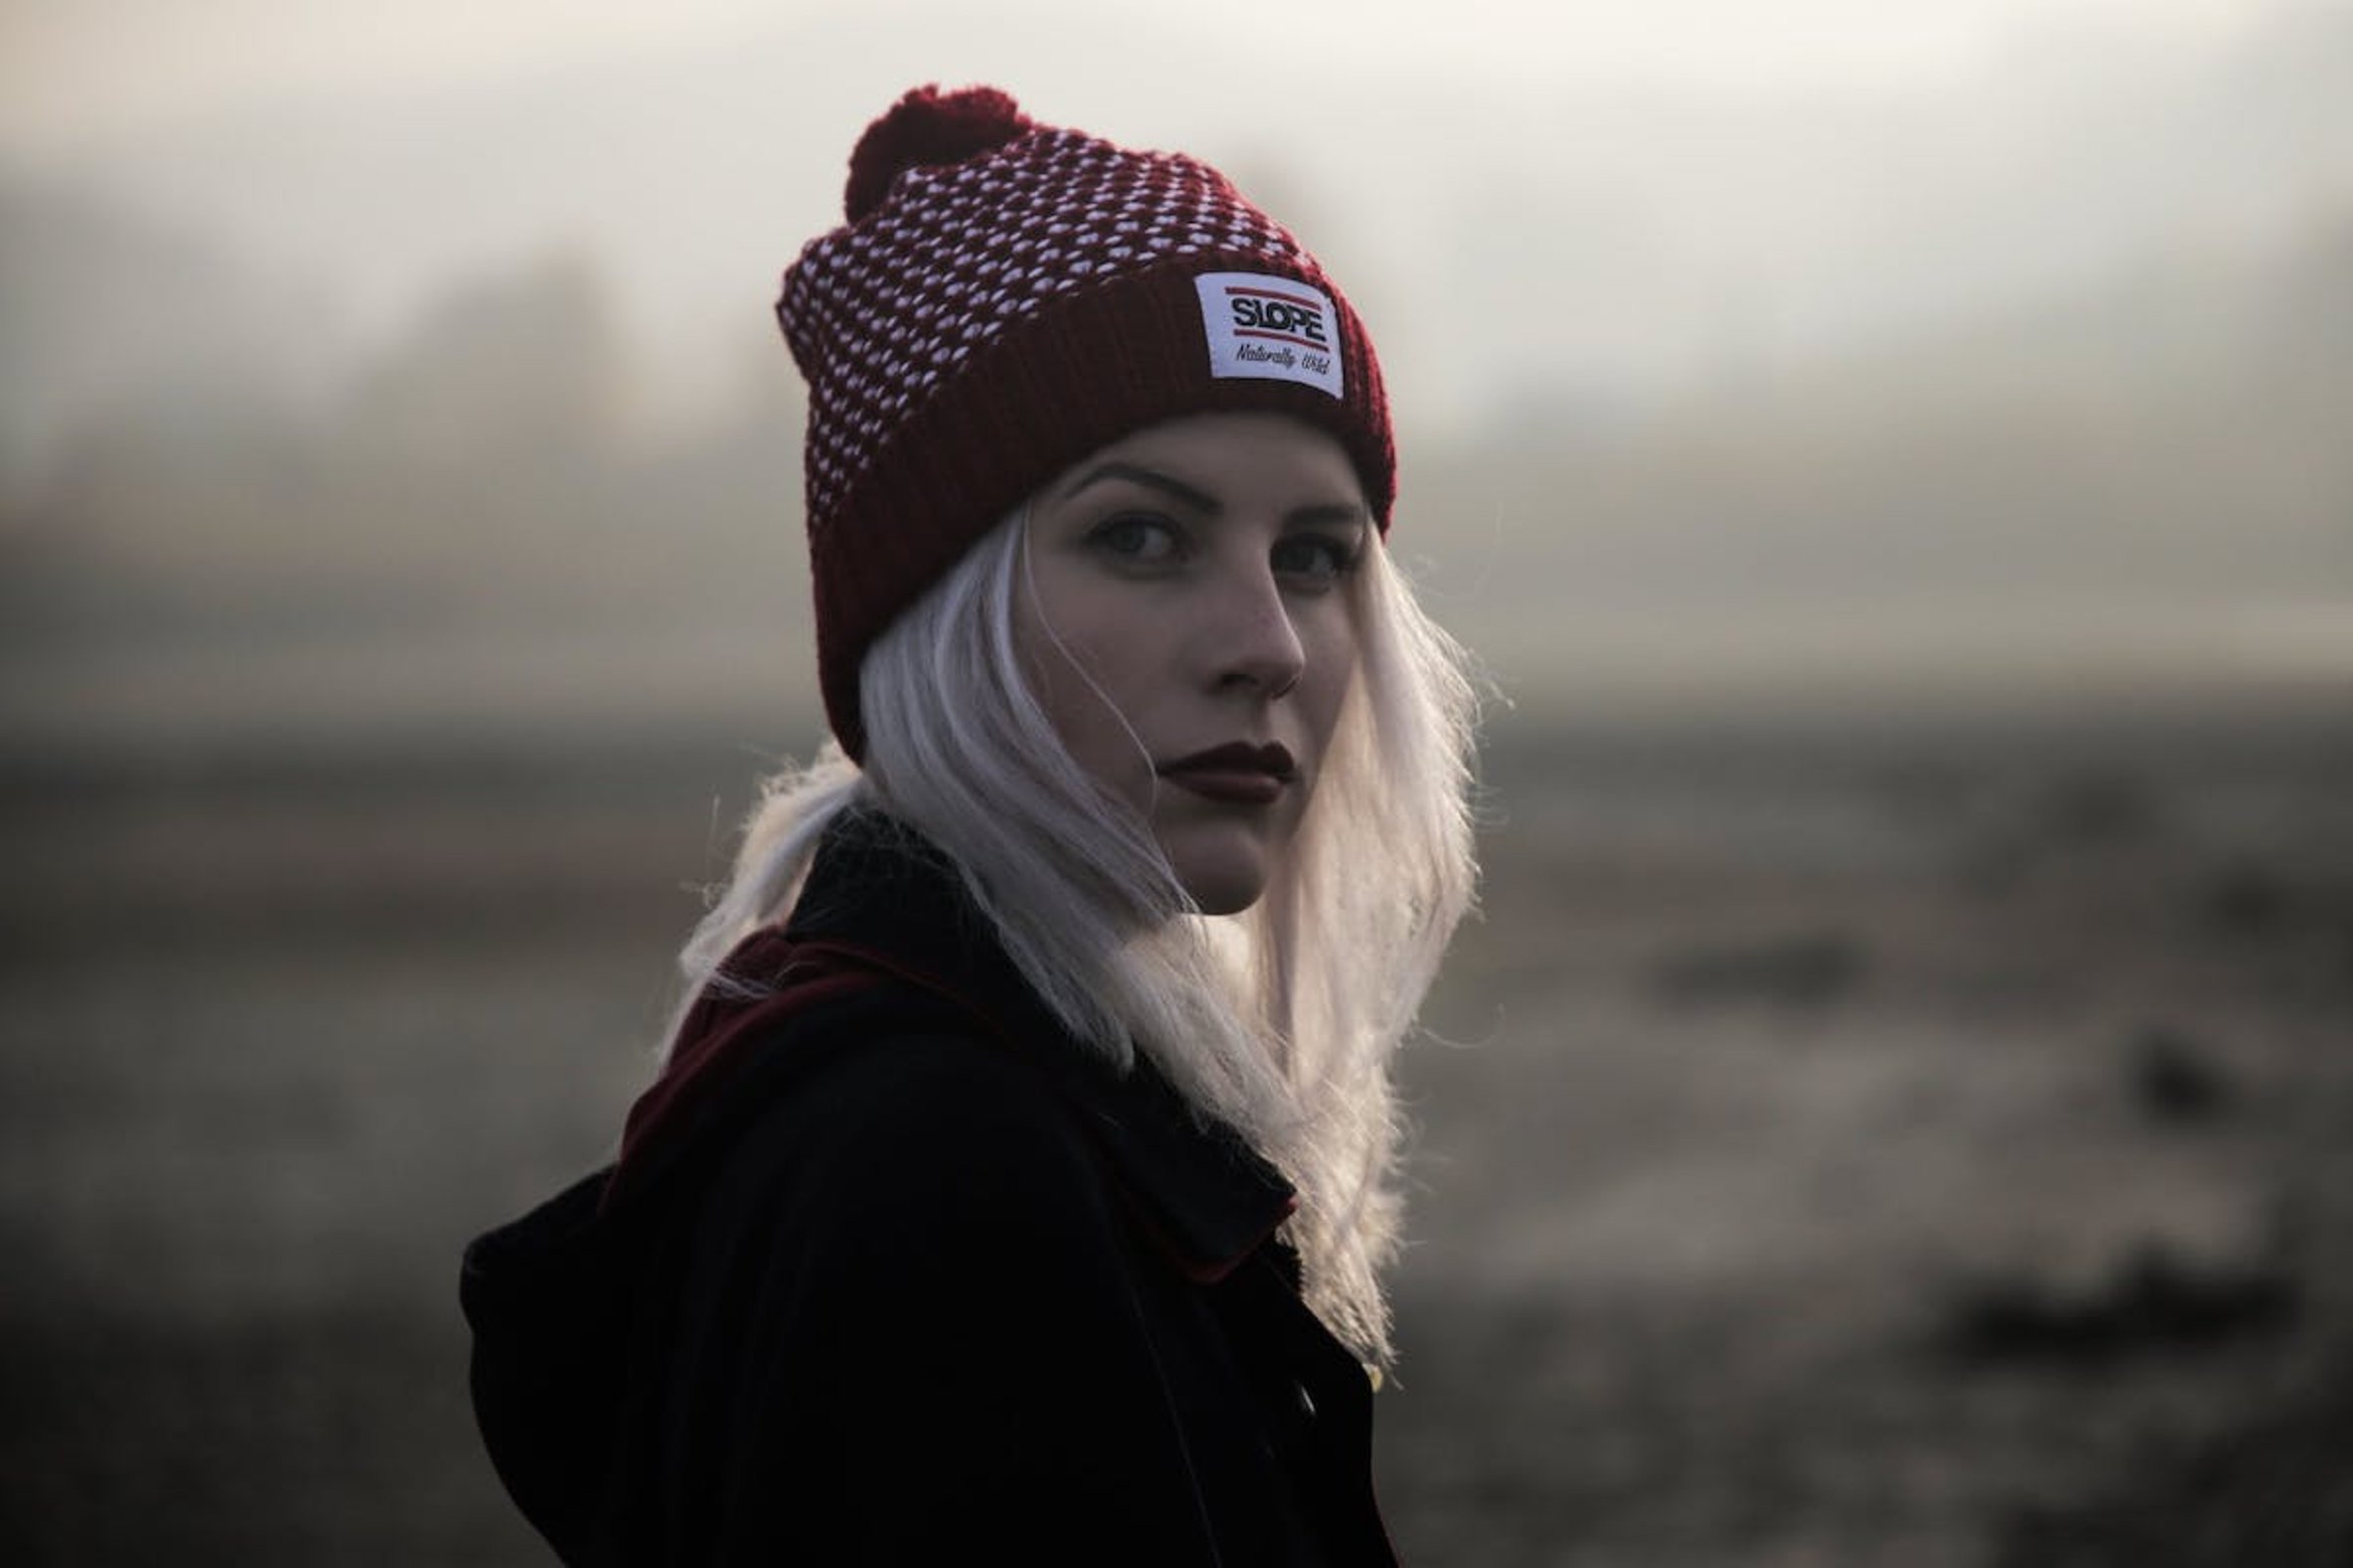 Seeking Two Models for a Beanie Photoshoot